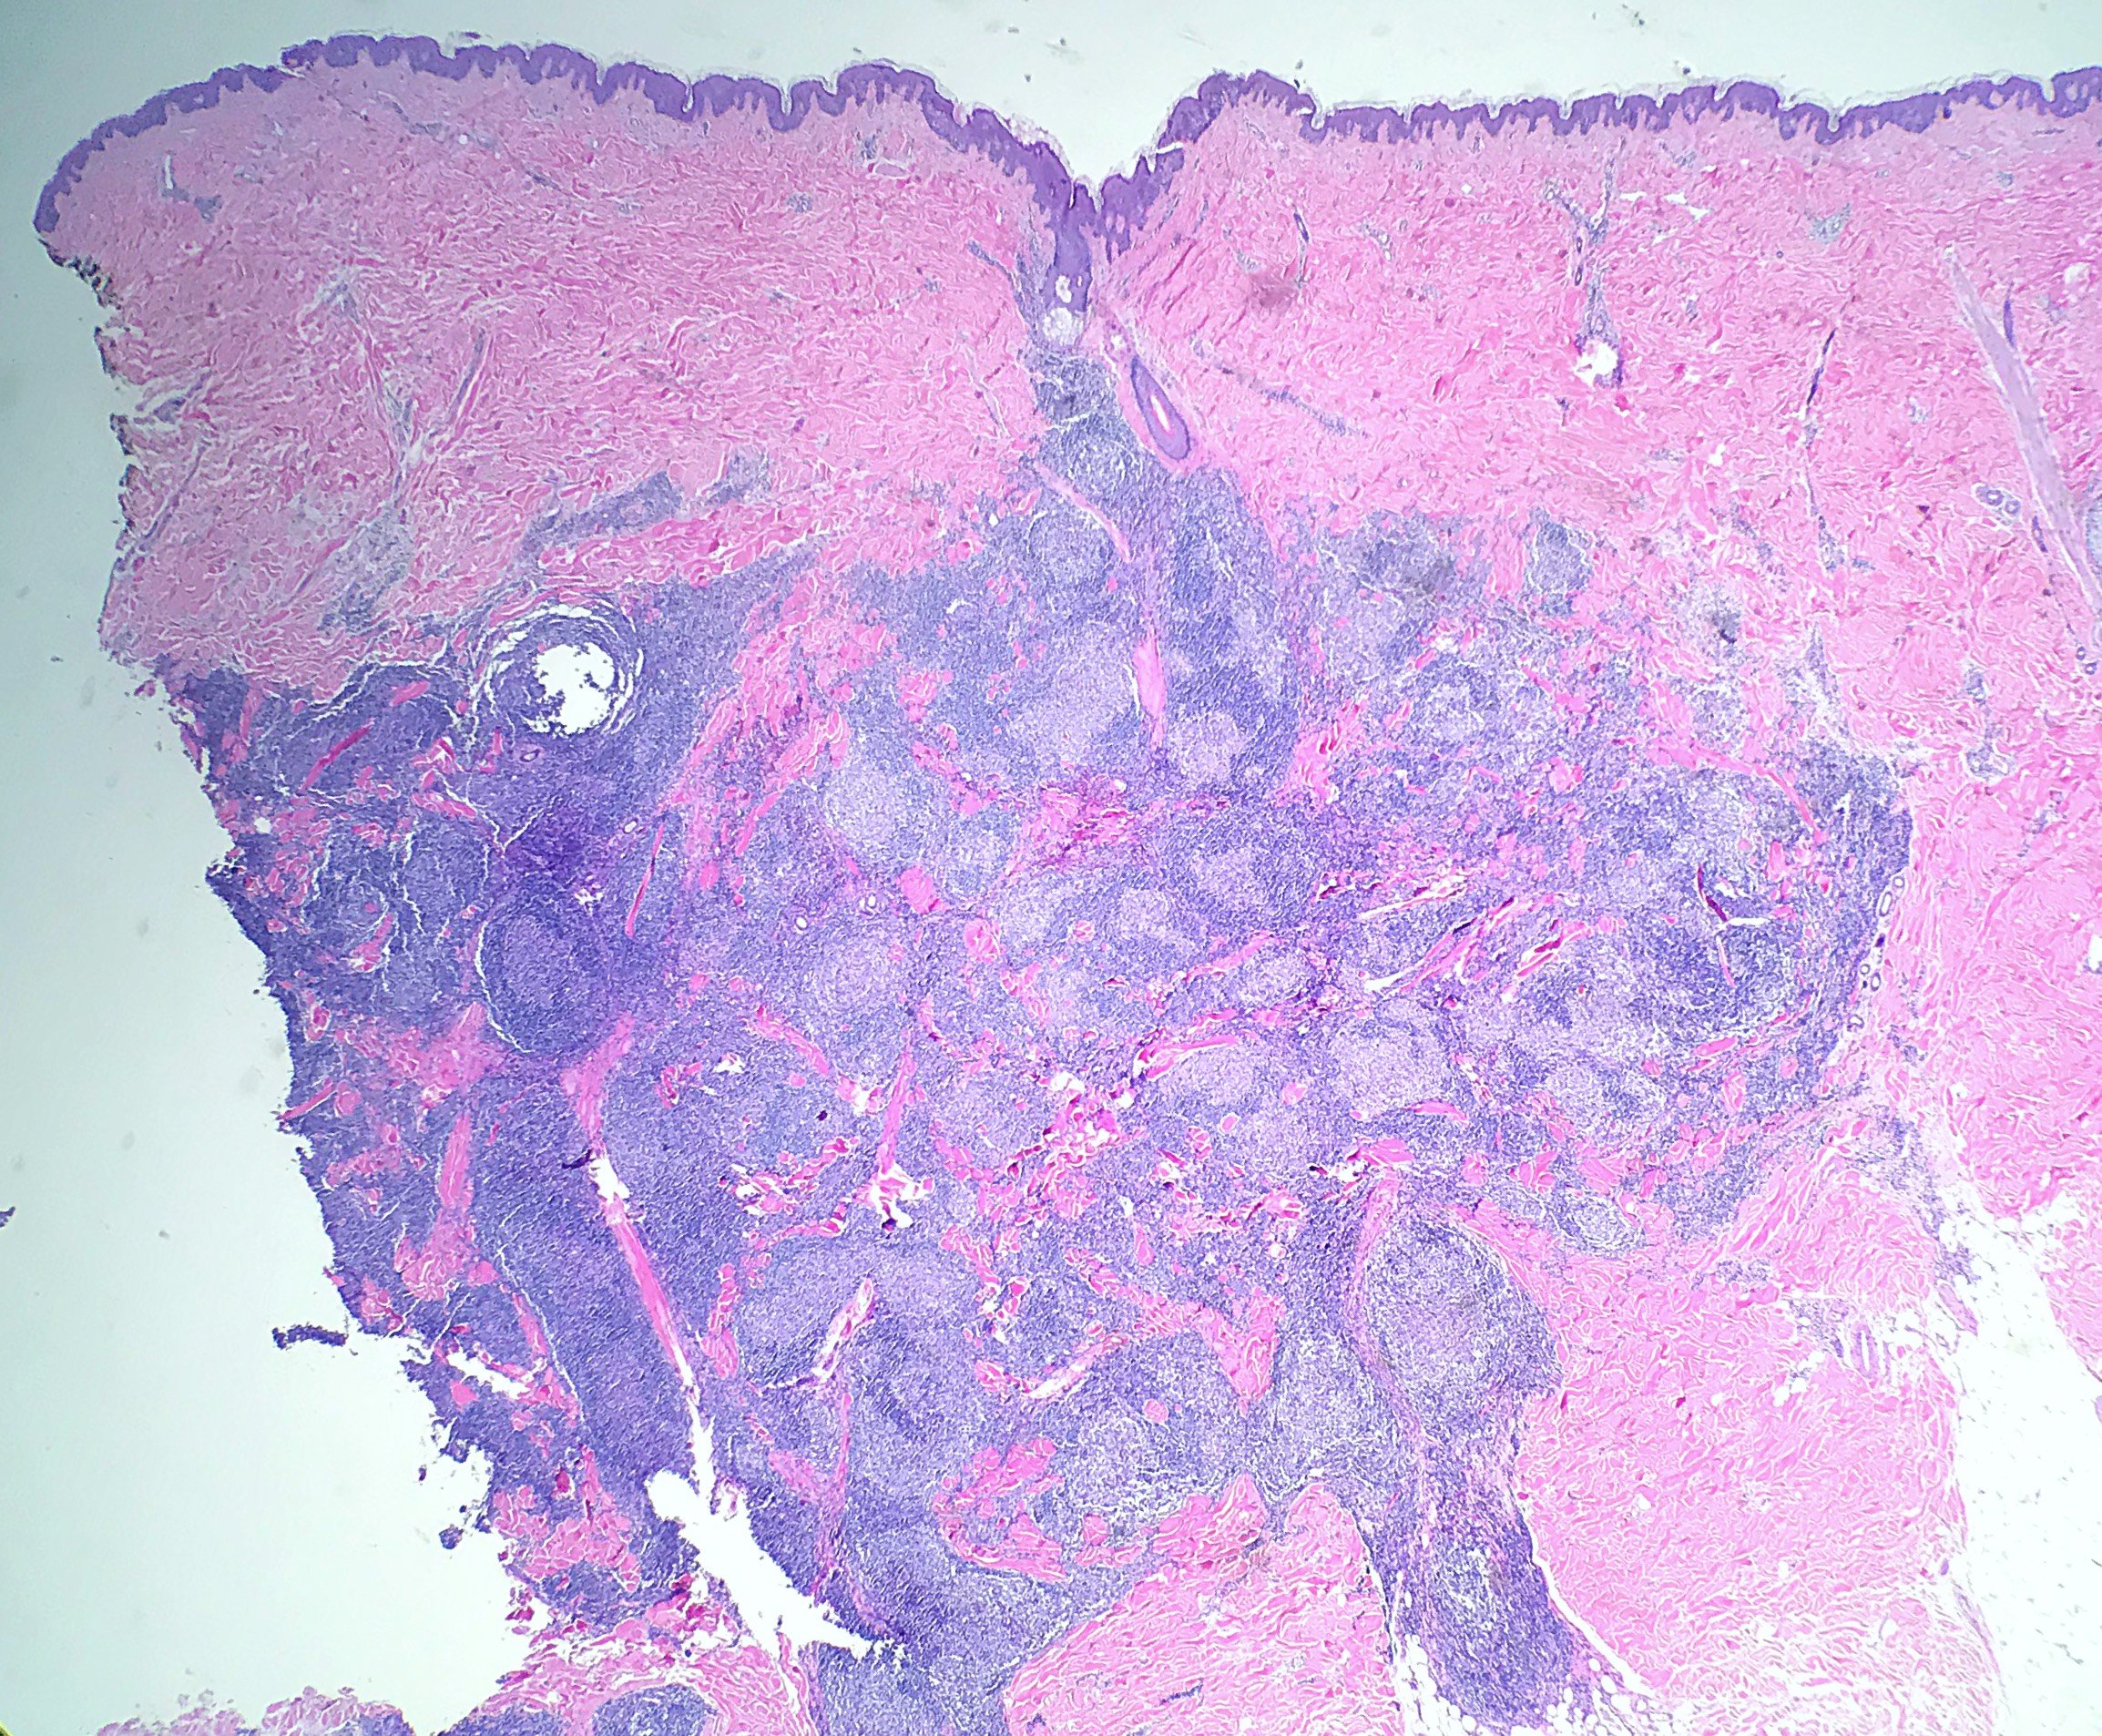 Primary cutaneous follicle center lymphoma demonstrating densely packed follicles in skin shave biopsy.